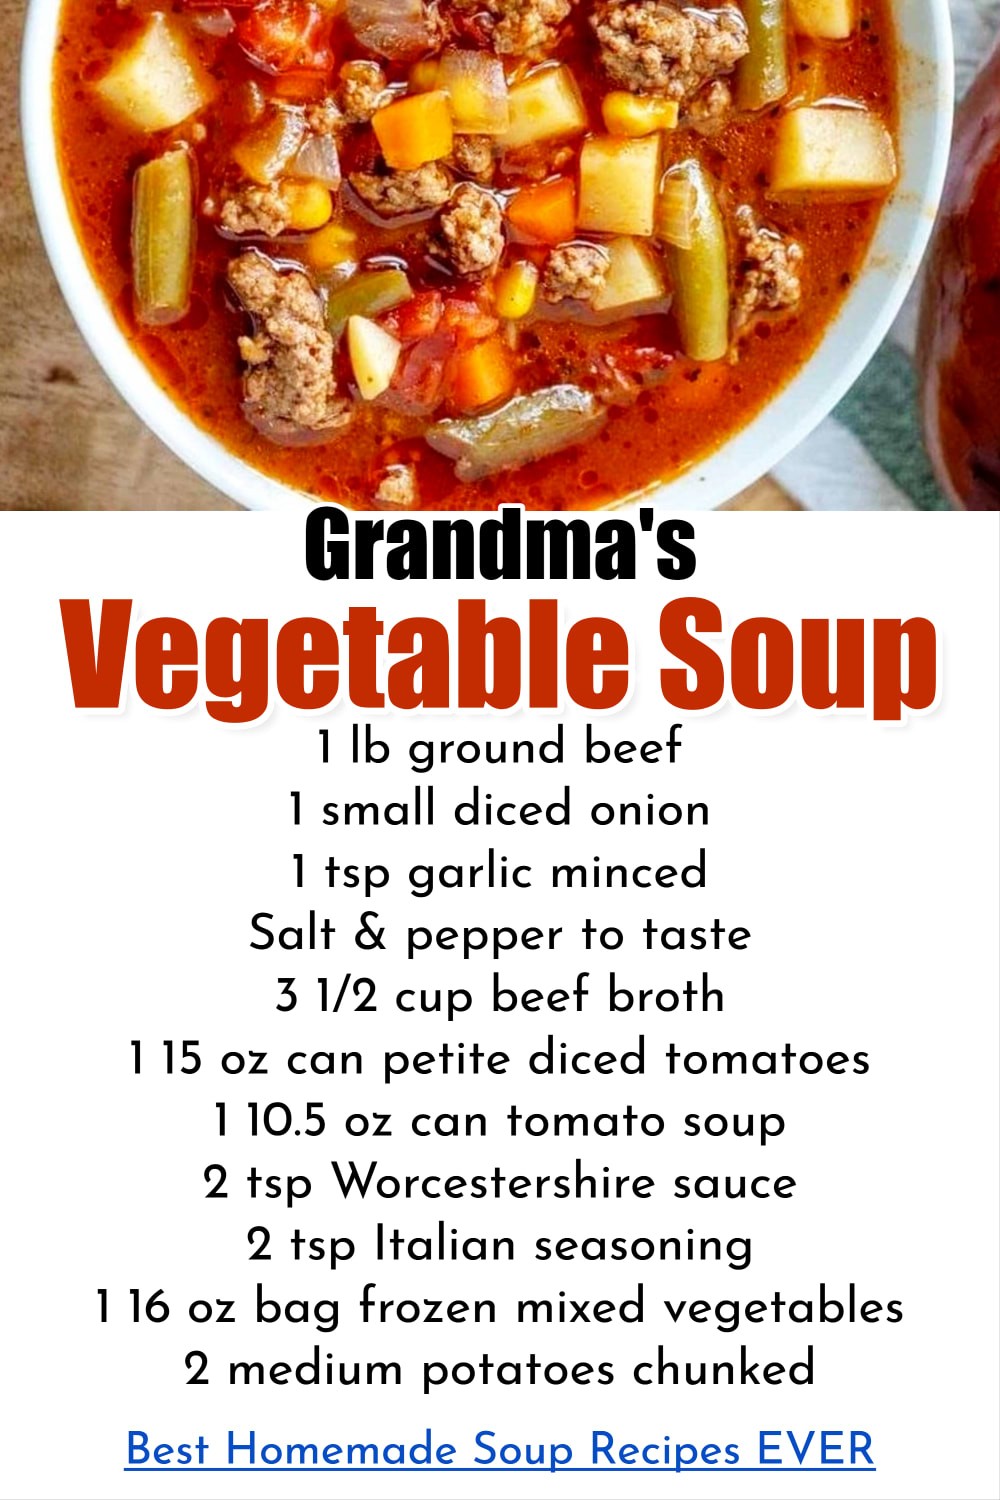 Homemade Soup Recipes - My Garndma's Homemade Old-Fashioned Vegetable Soup Recipes - Best homemade soup recipes EVER